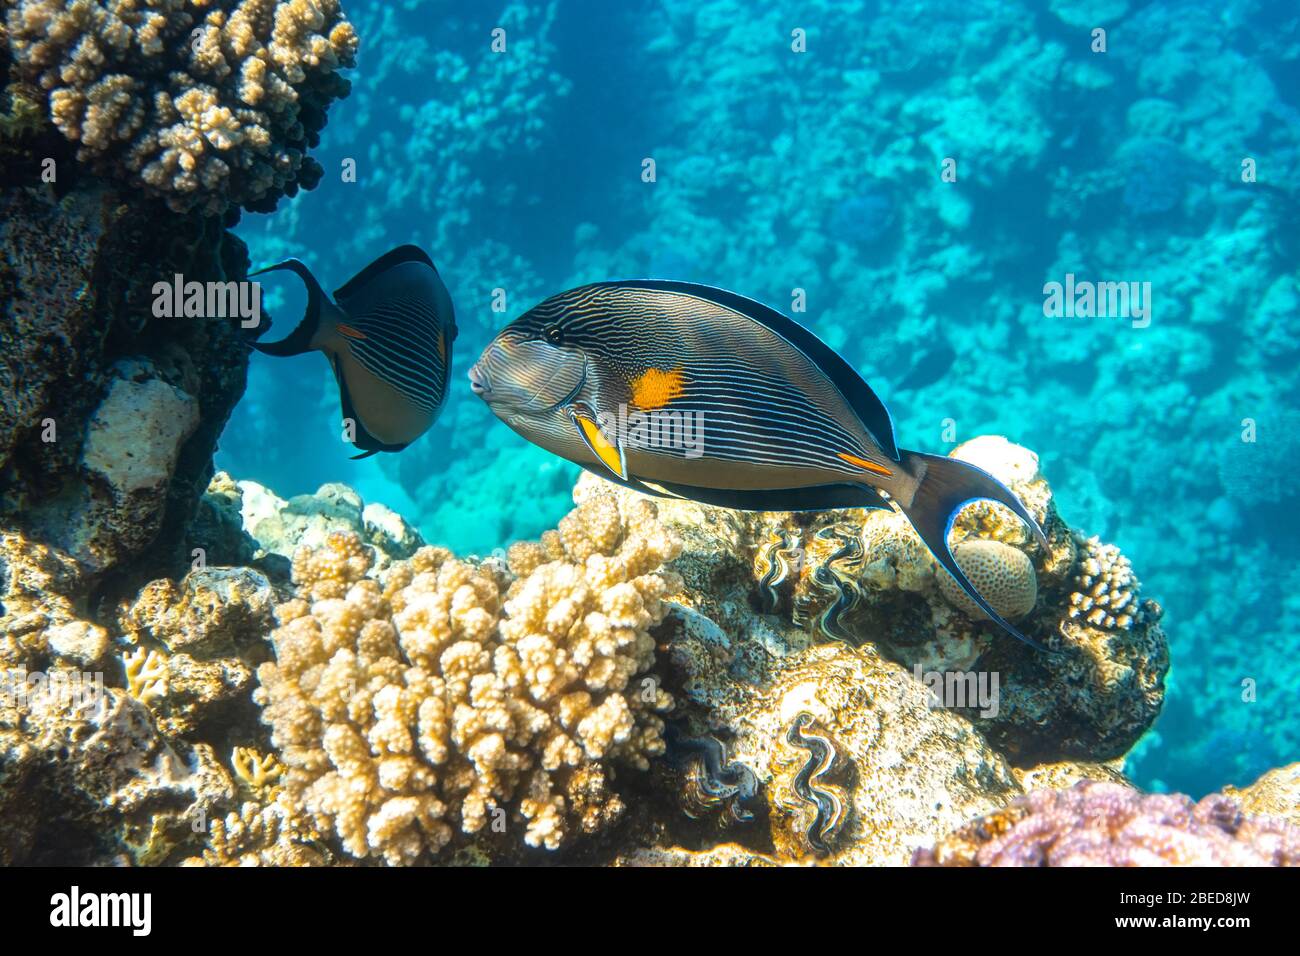 Tropical Fish In The Ocean Near Coral Reef. Sohal Surgeonfish (Acanthurus Sohal) With Black Fins, Yellow And Blue Stripes In The Red Sea, Egypt. Side Stock Photo